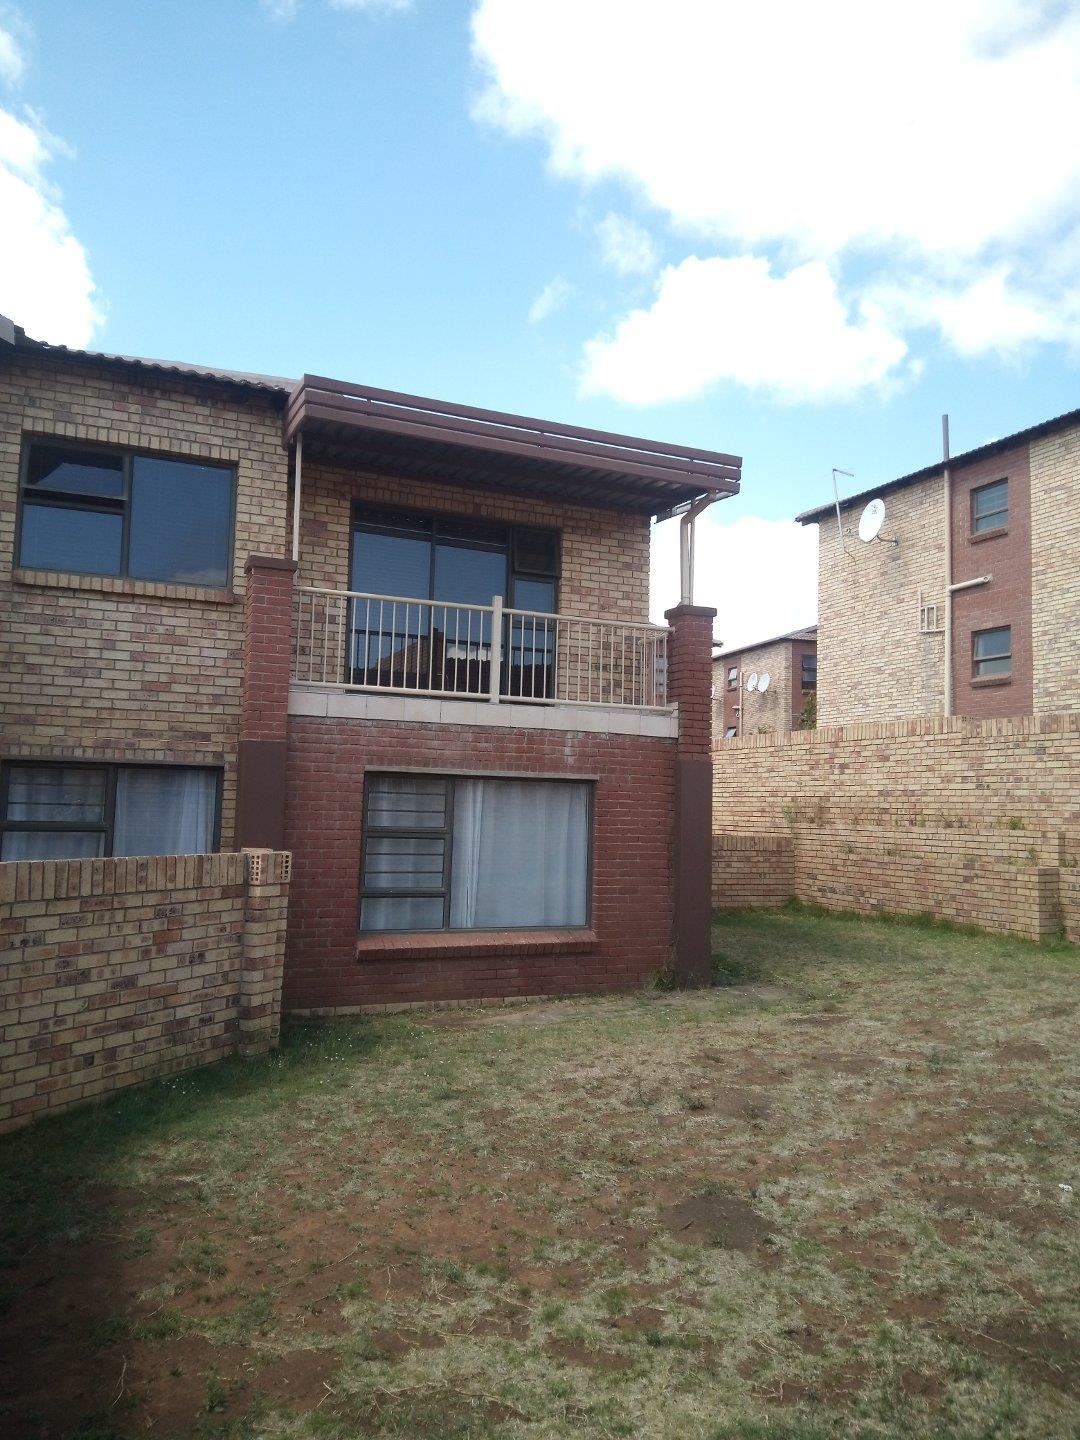 2 Bedroom Townhouse for sale in Shellyvale